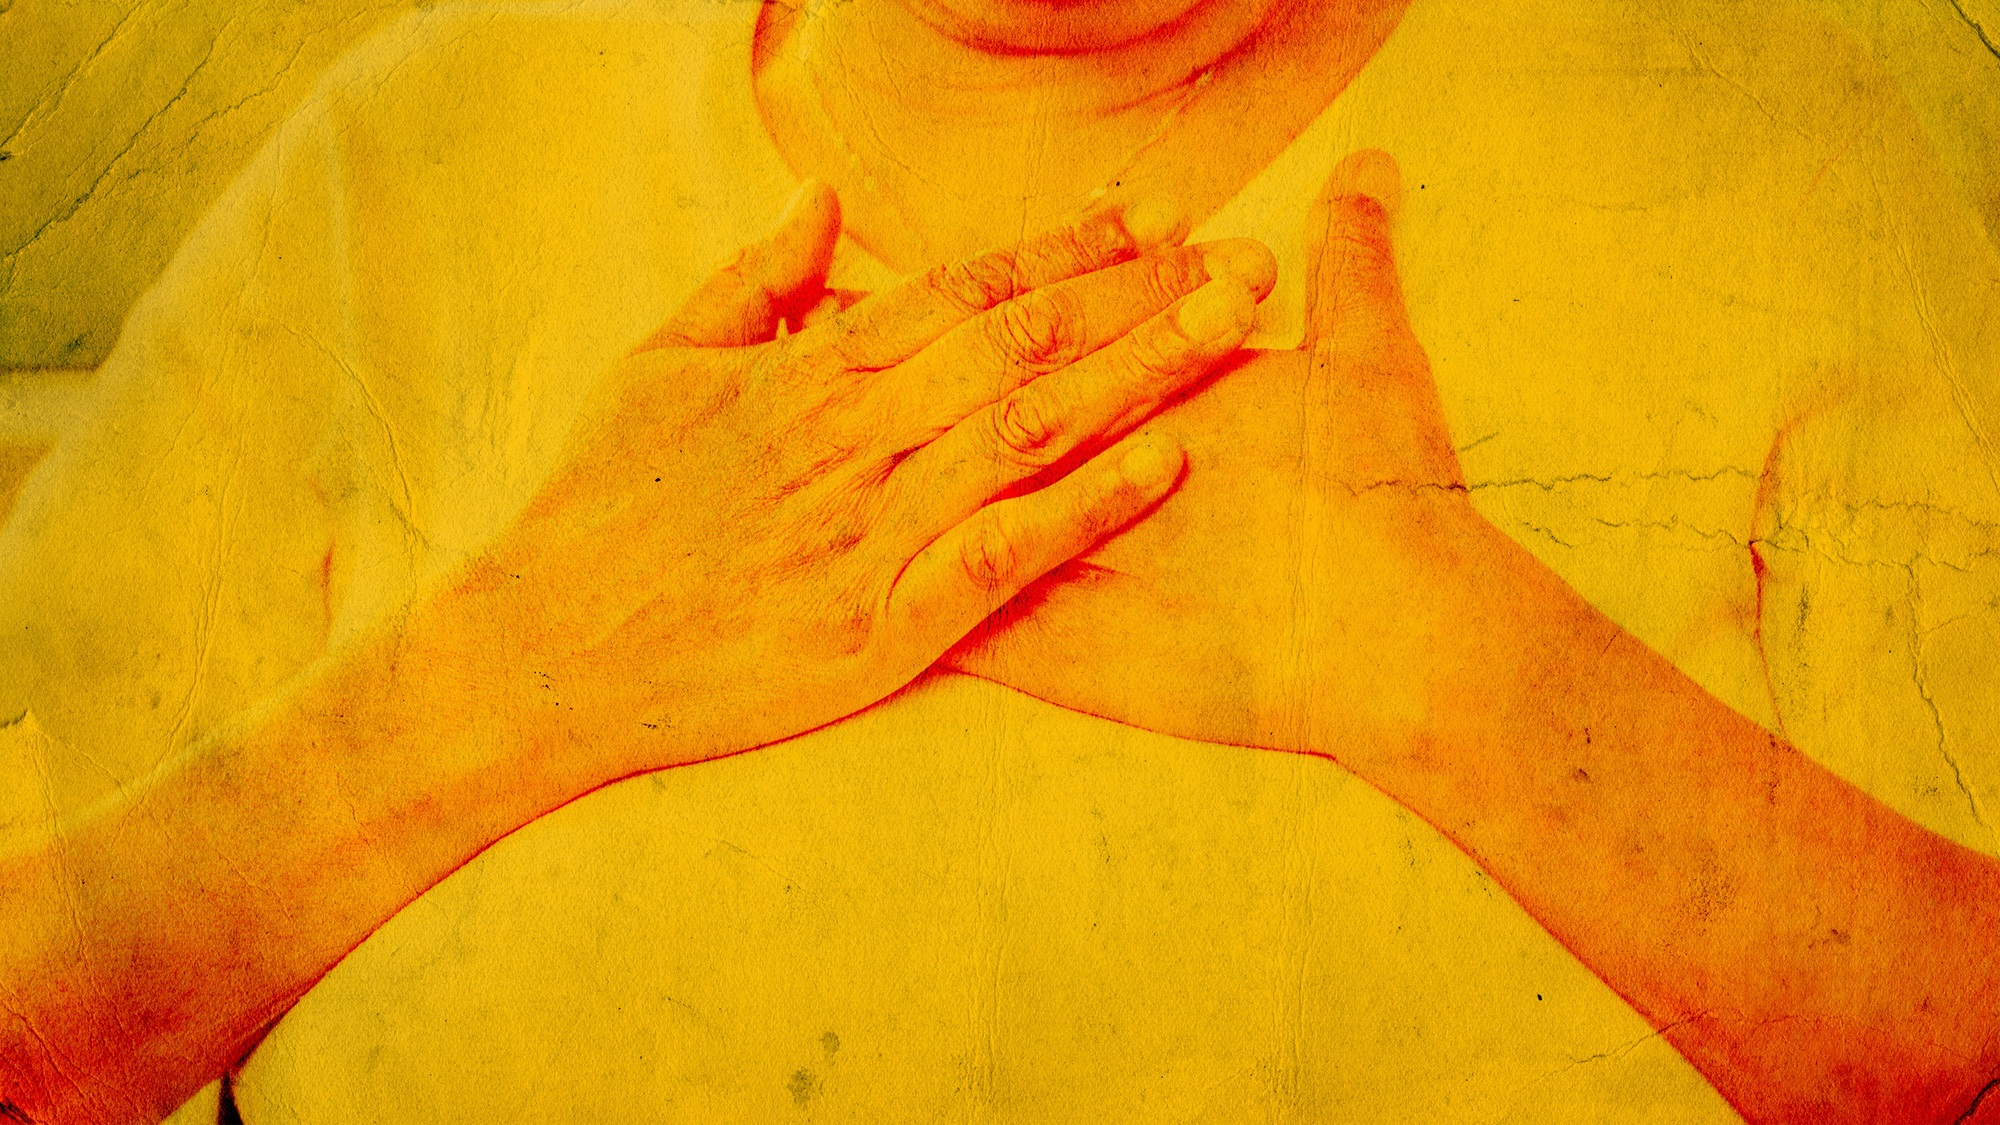 Hands crossed placed on chest with yellow paper treatment. March 2022